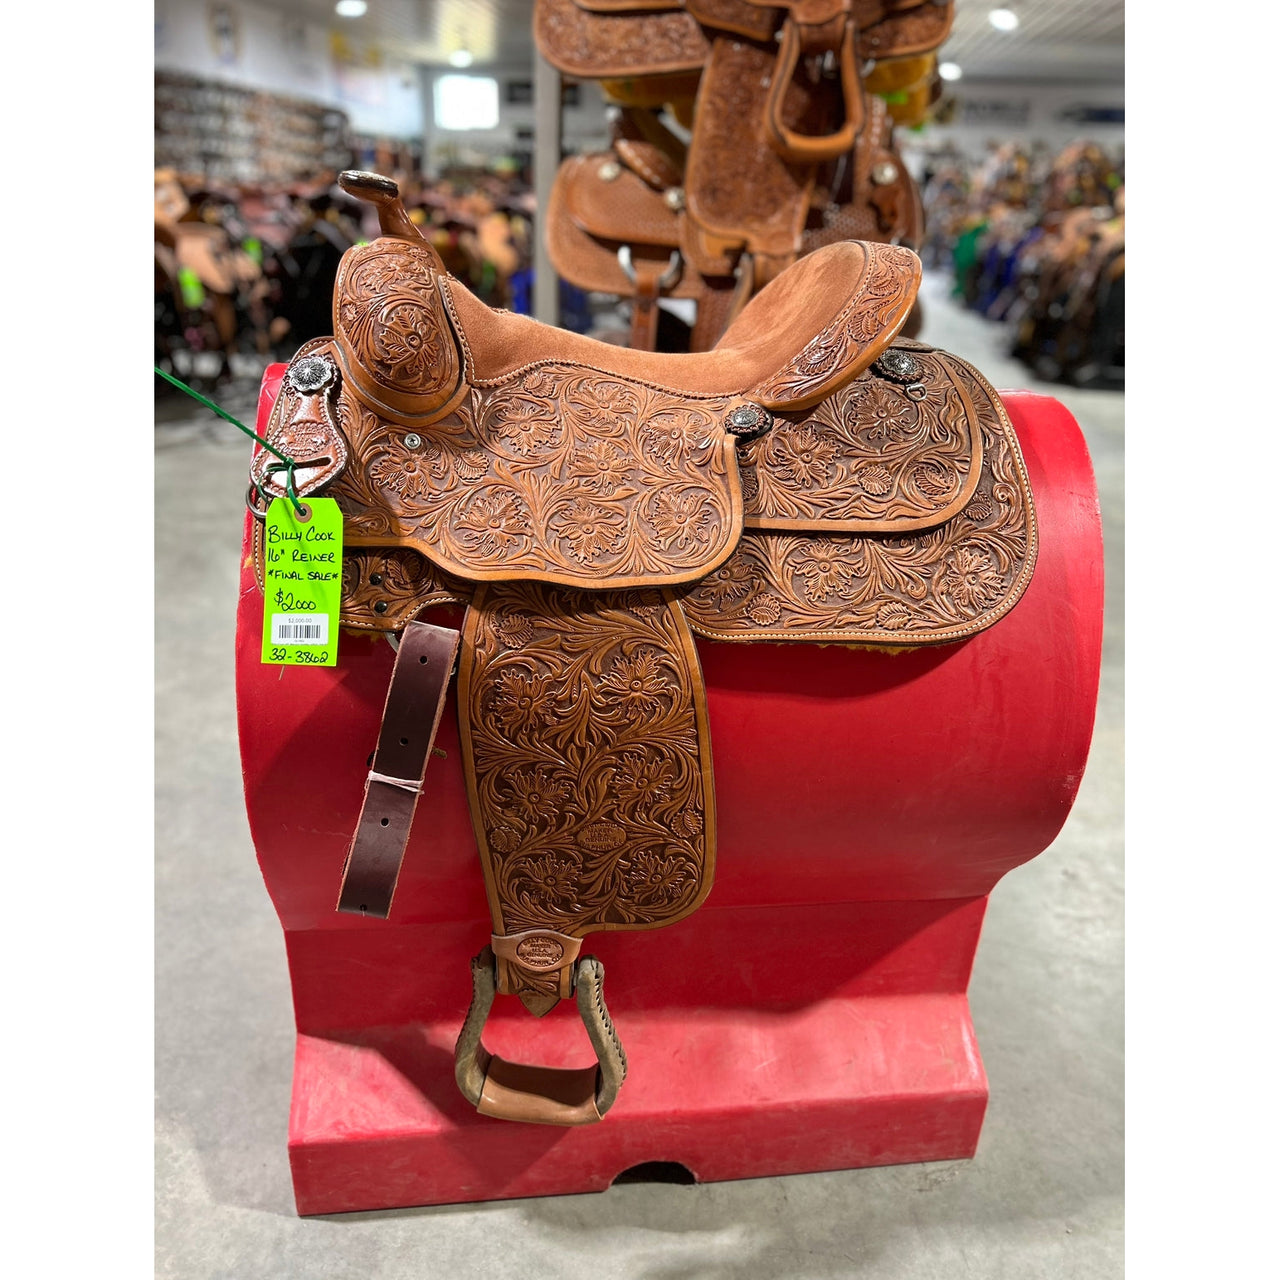 Billy Cook 16"  Reining Saddle - FINAL SALE